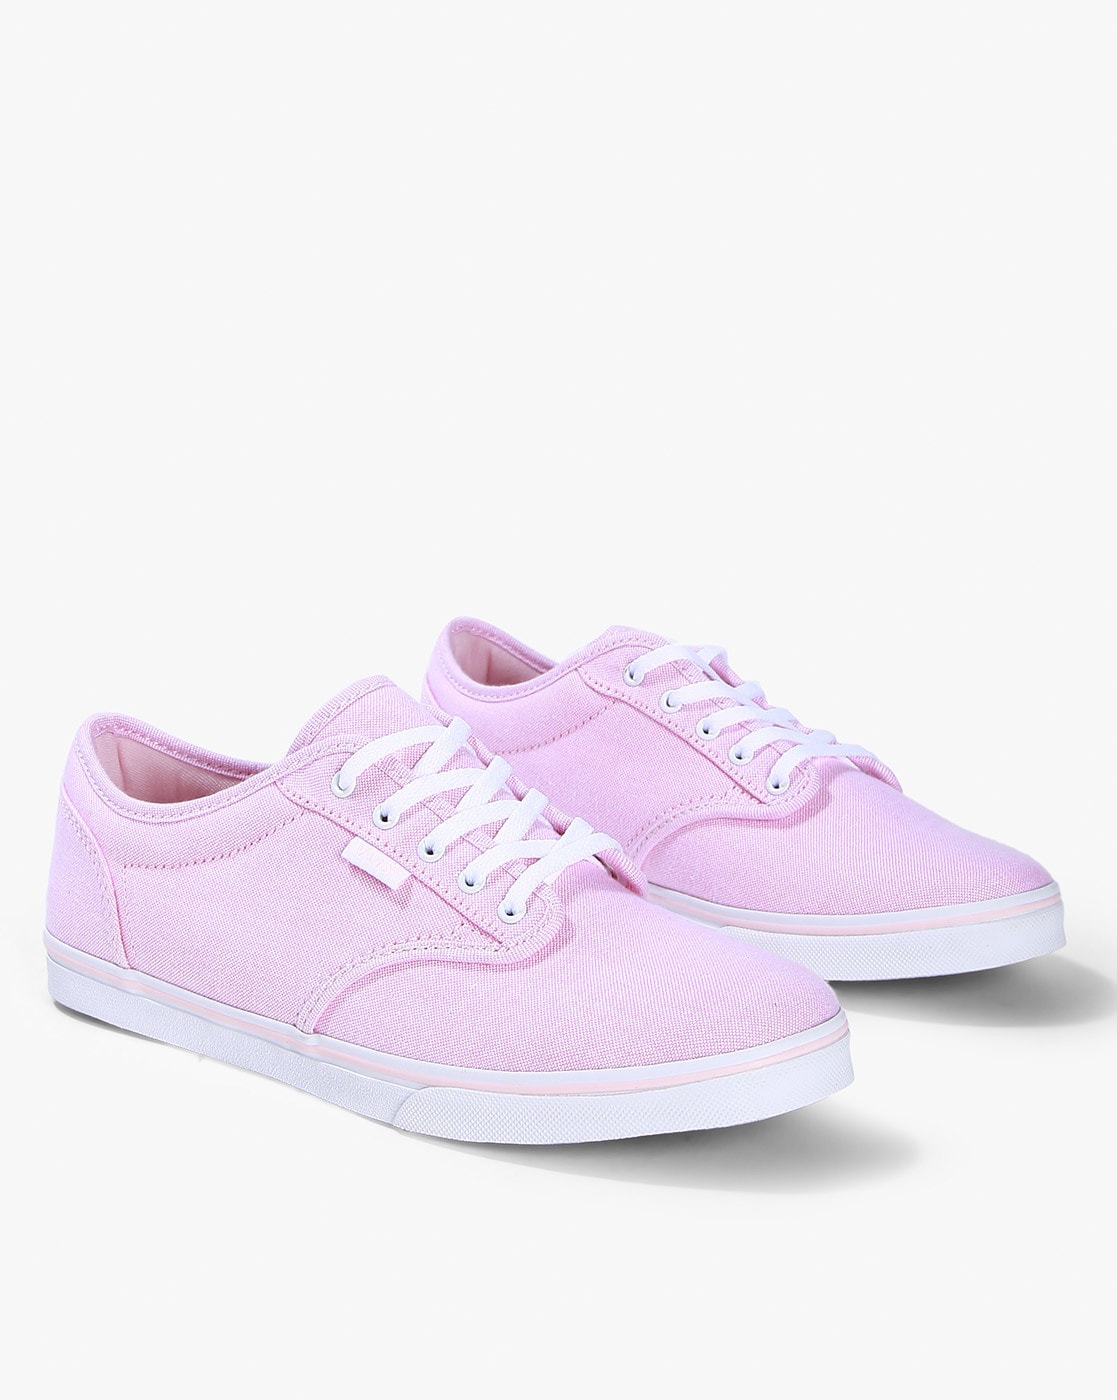 van shoes pink and white